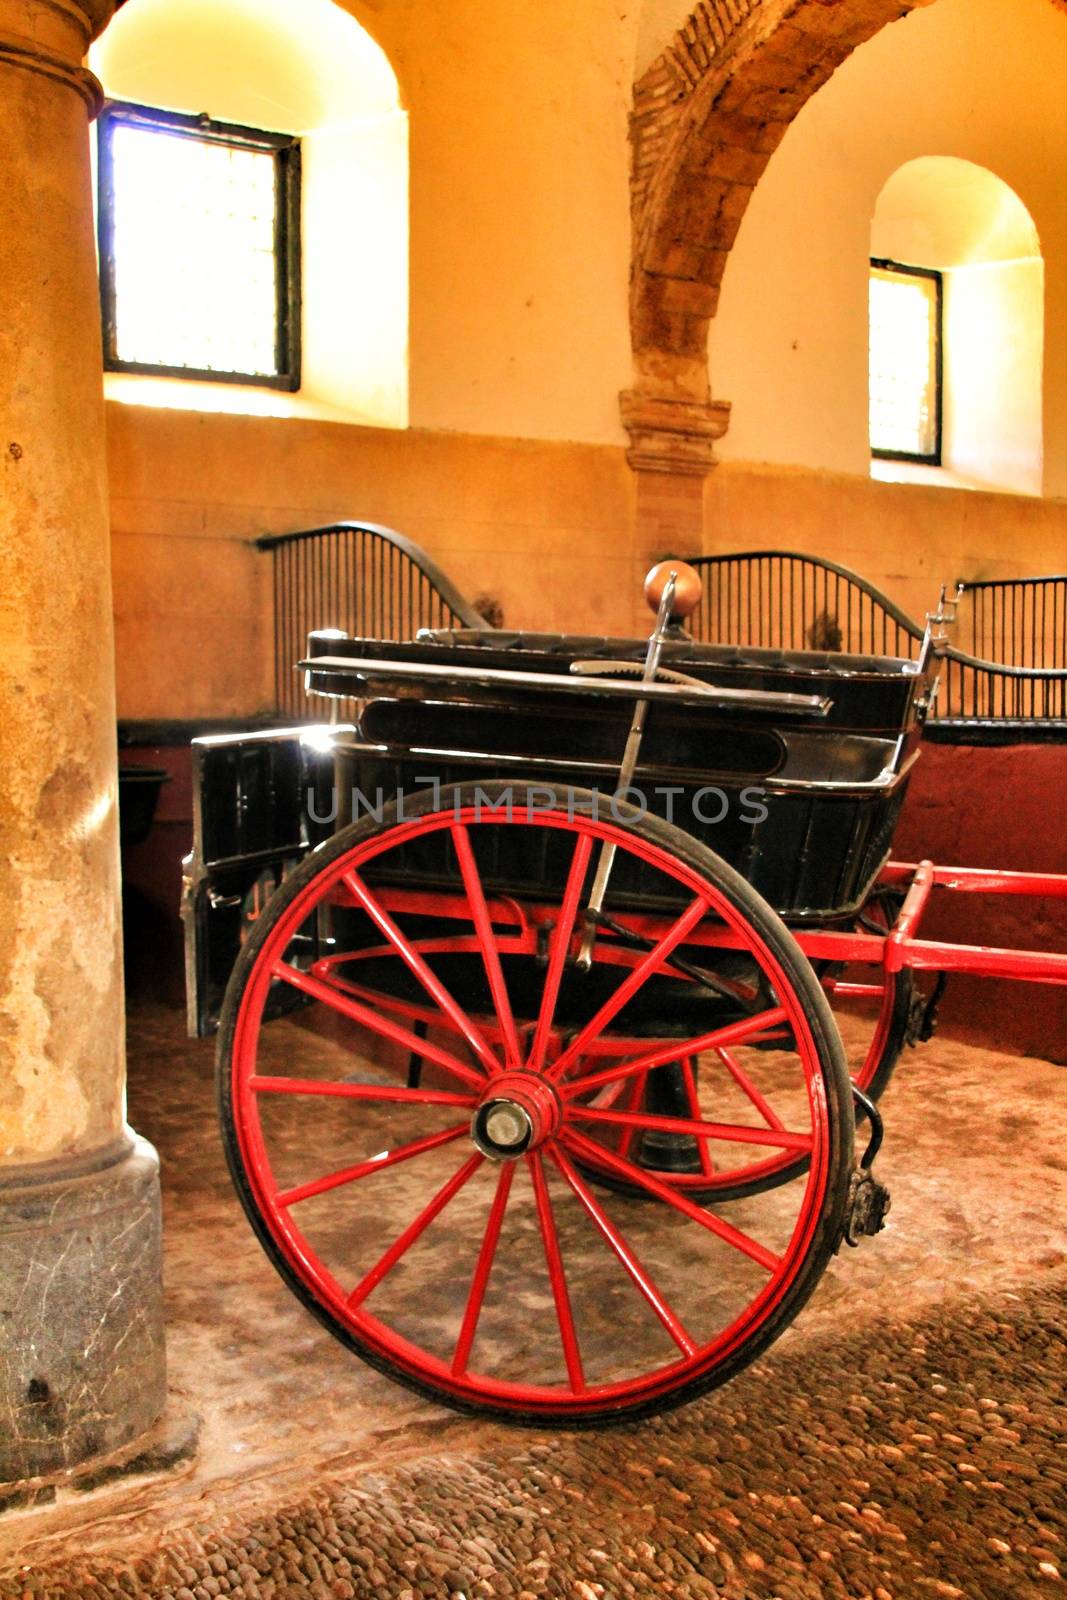 Old carriages in a house in Cordoba, Spain